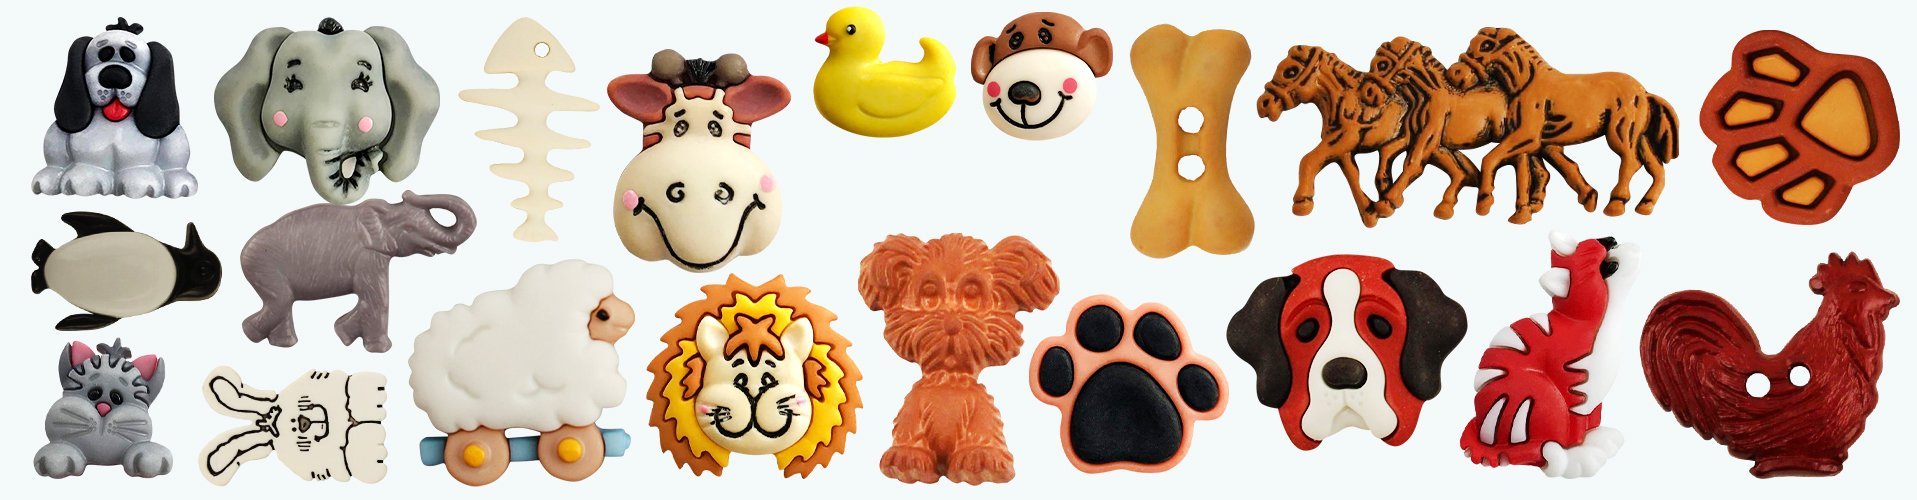 Pets & Animals | Buttons Galore and More